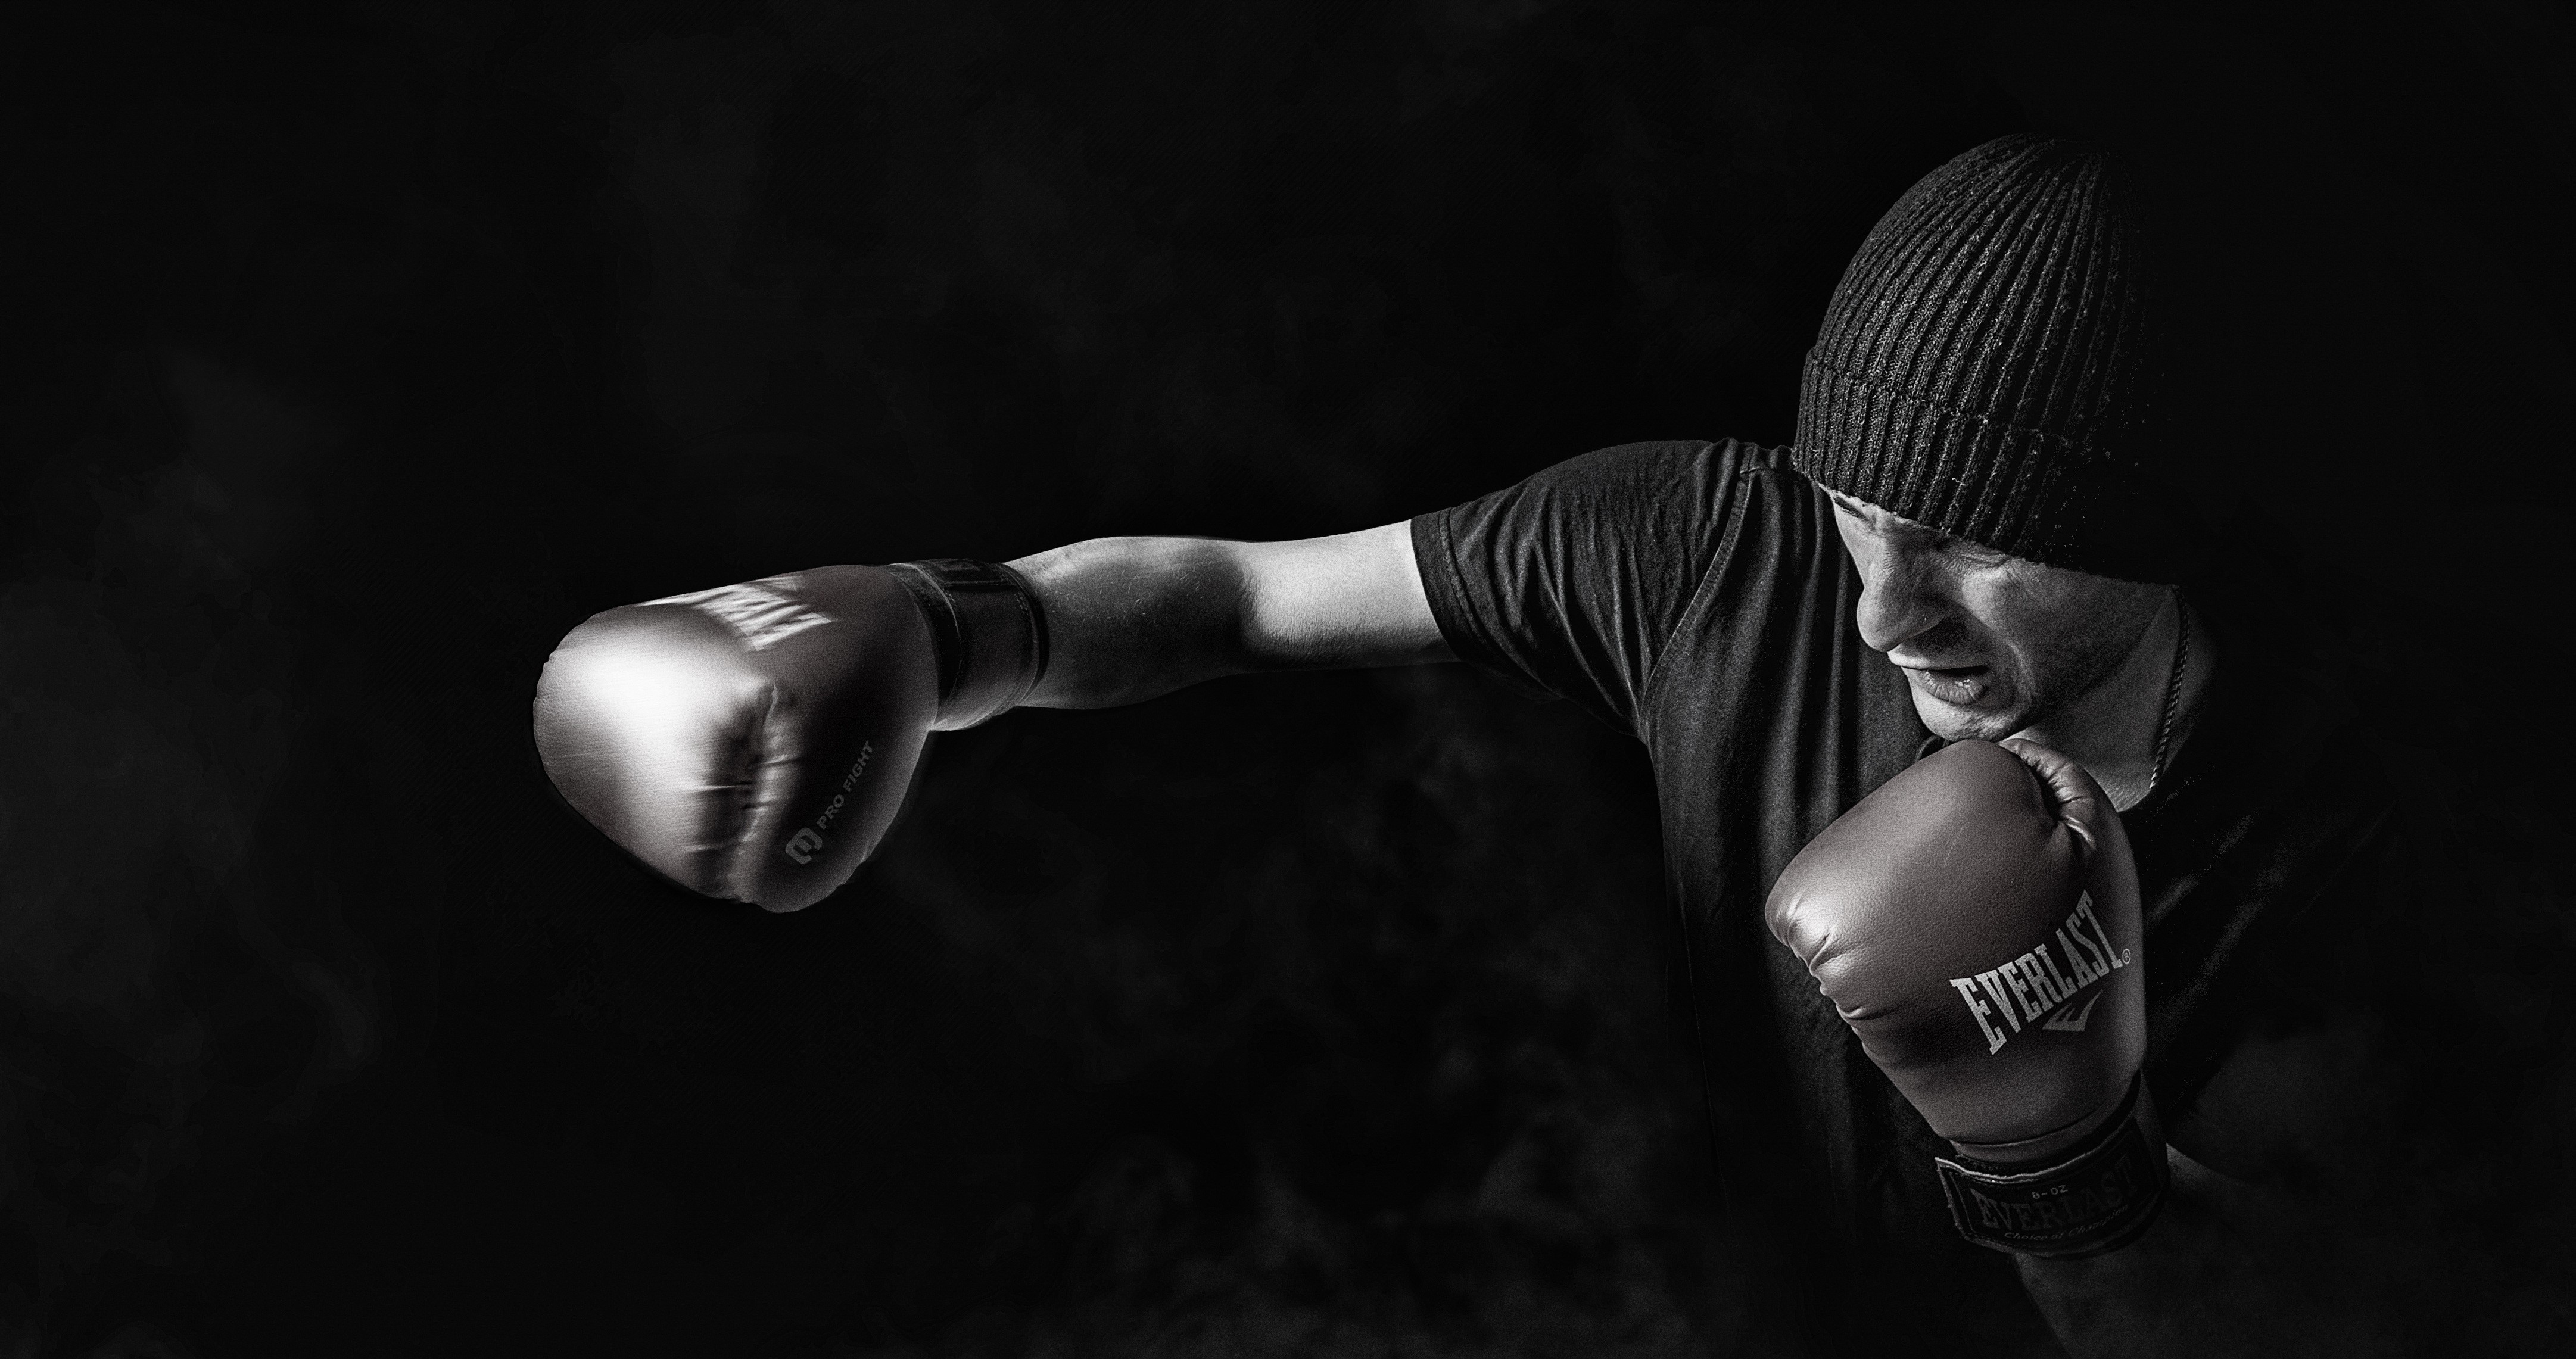 4K, Men, Boxing, Black background, Black and white, Winter hat, Hands, Glove, To hit Gallery HD Wallpaper